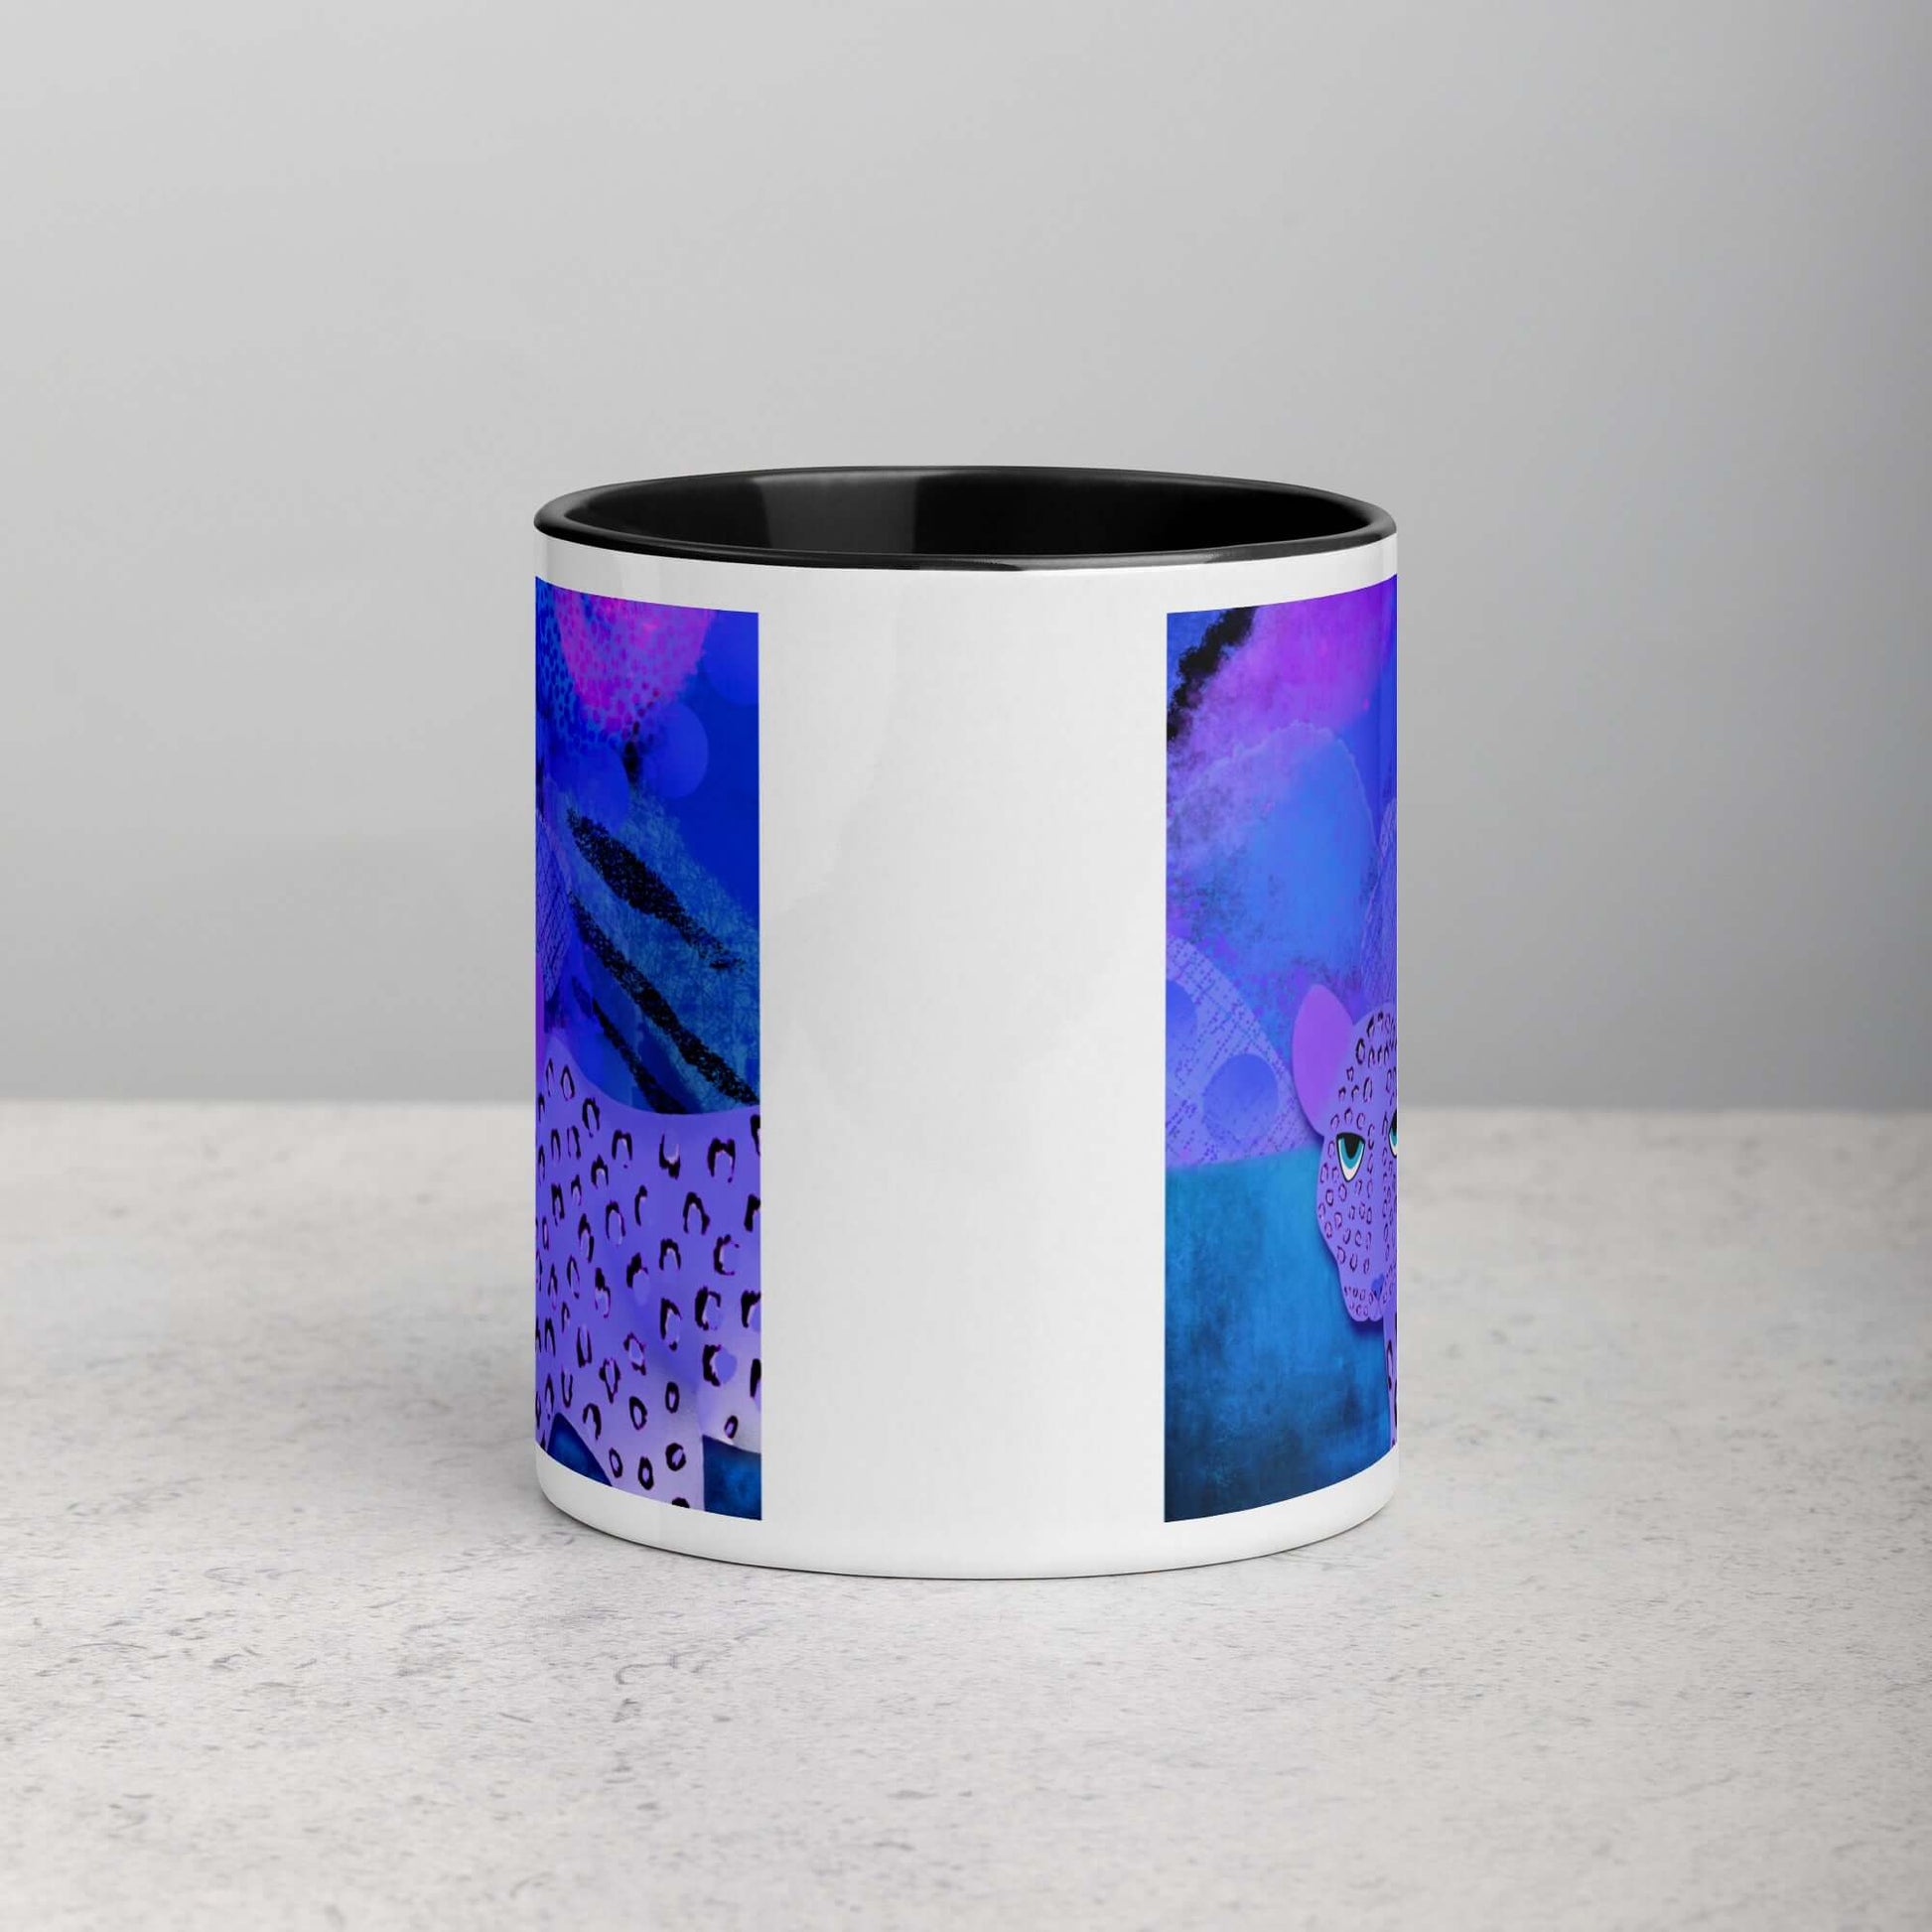 Purple Leopard on Blue and Purple Abstract Background “Blue Leopard” Mug with Black Color Inside Side View